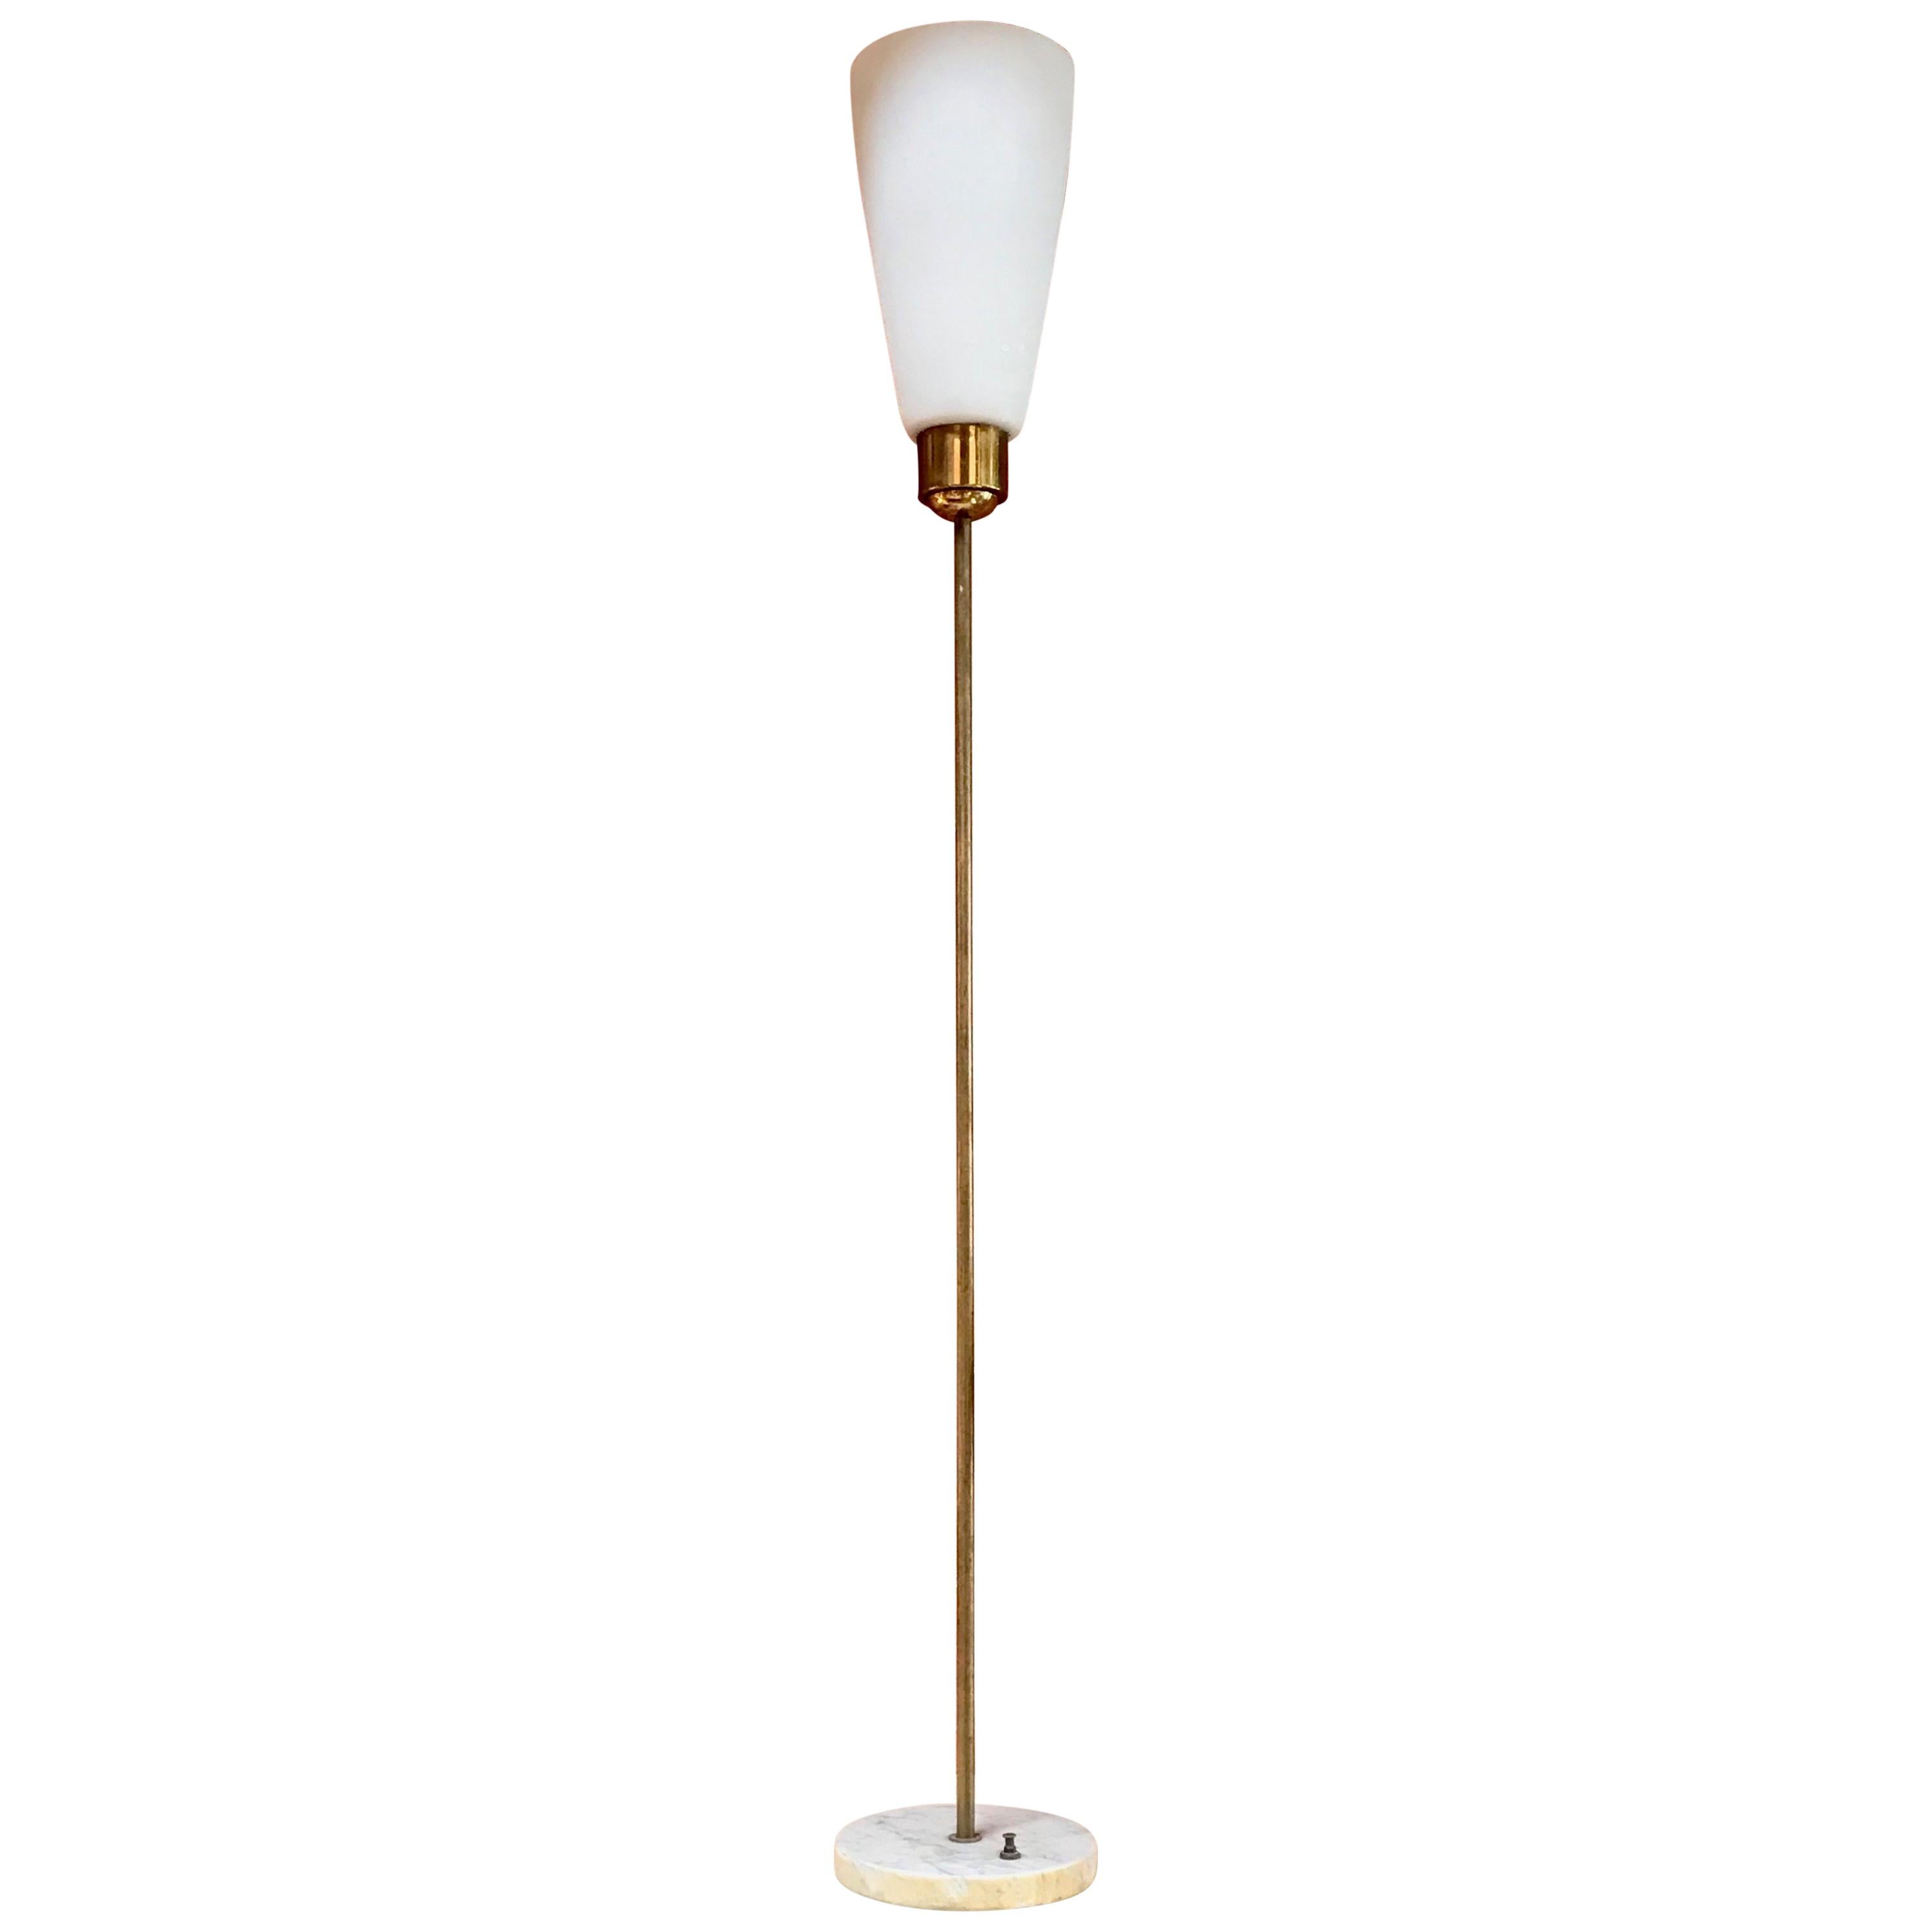 Midcentury Minimal Brass Floor Lamp with Marble Base, Italy, 1950s